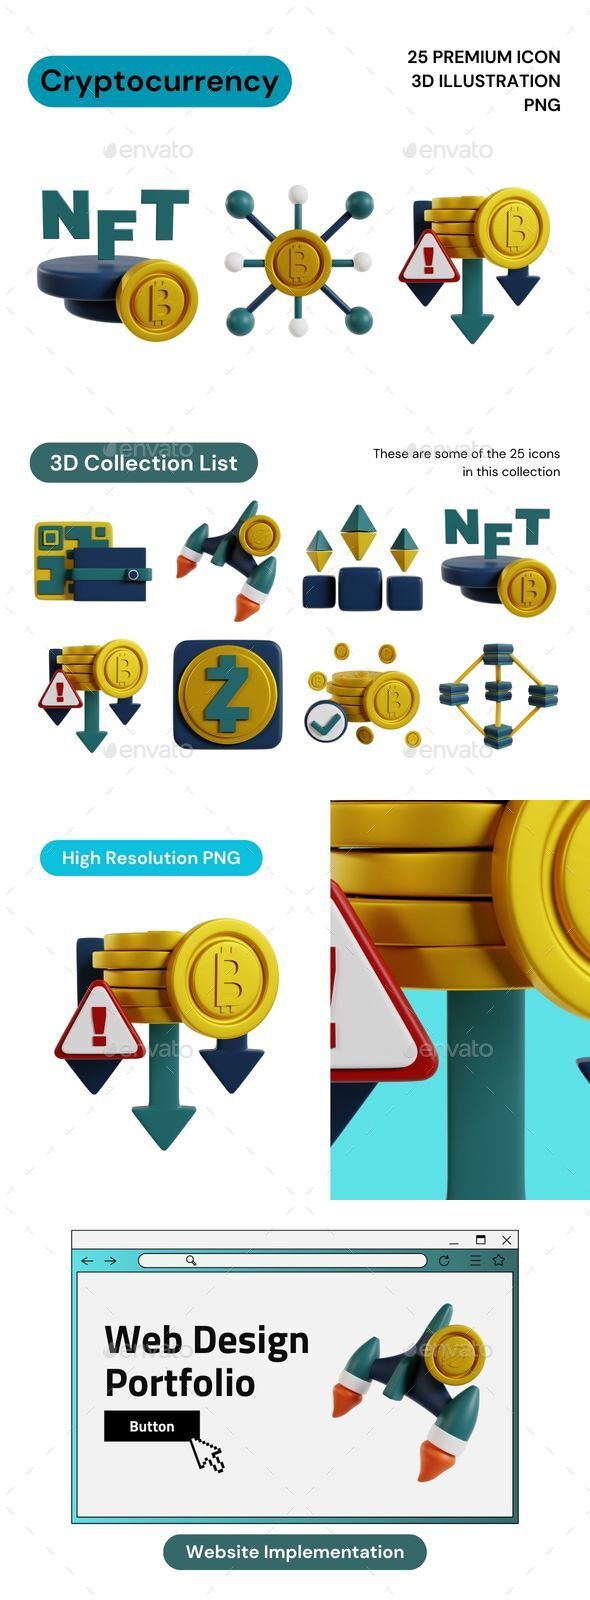 Cryptocurrency 3D Illustration